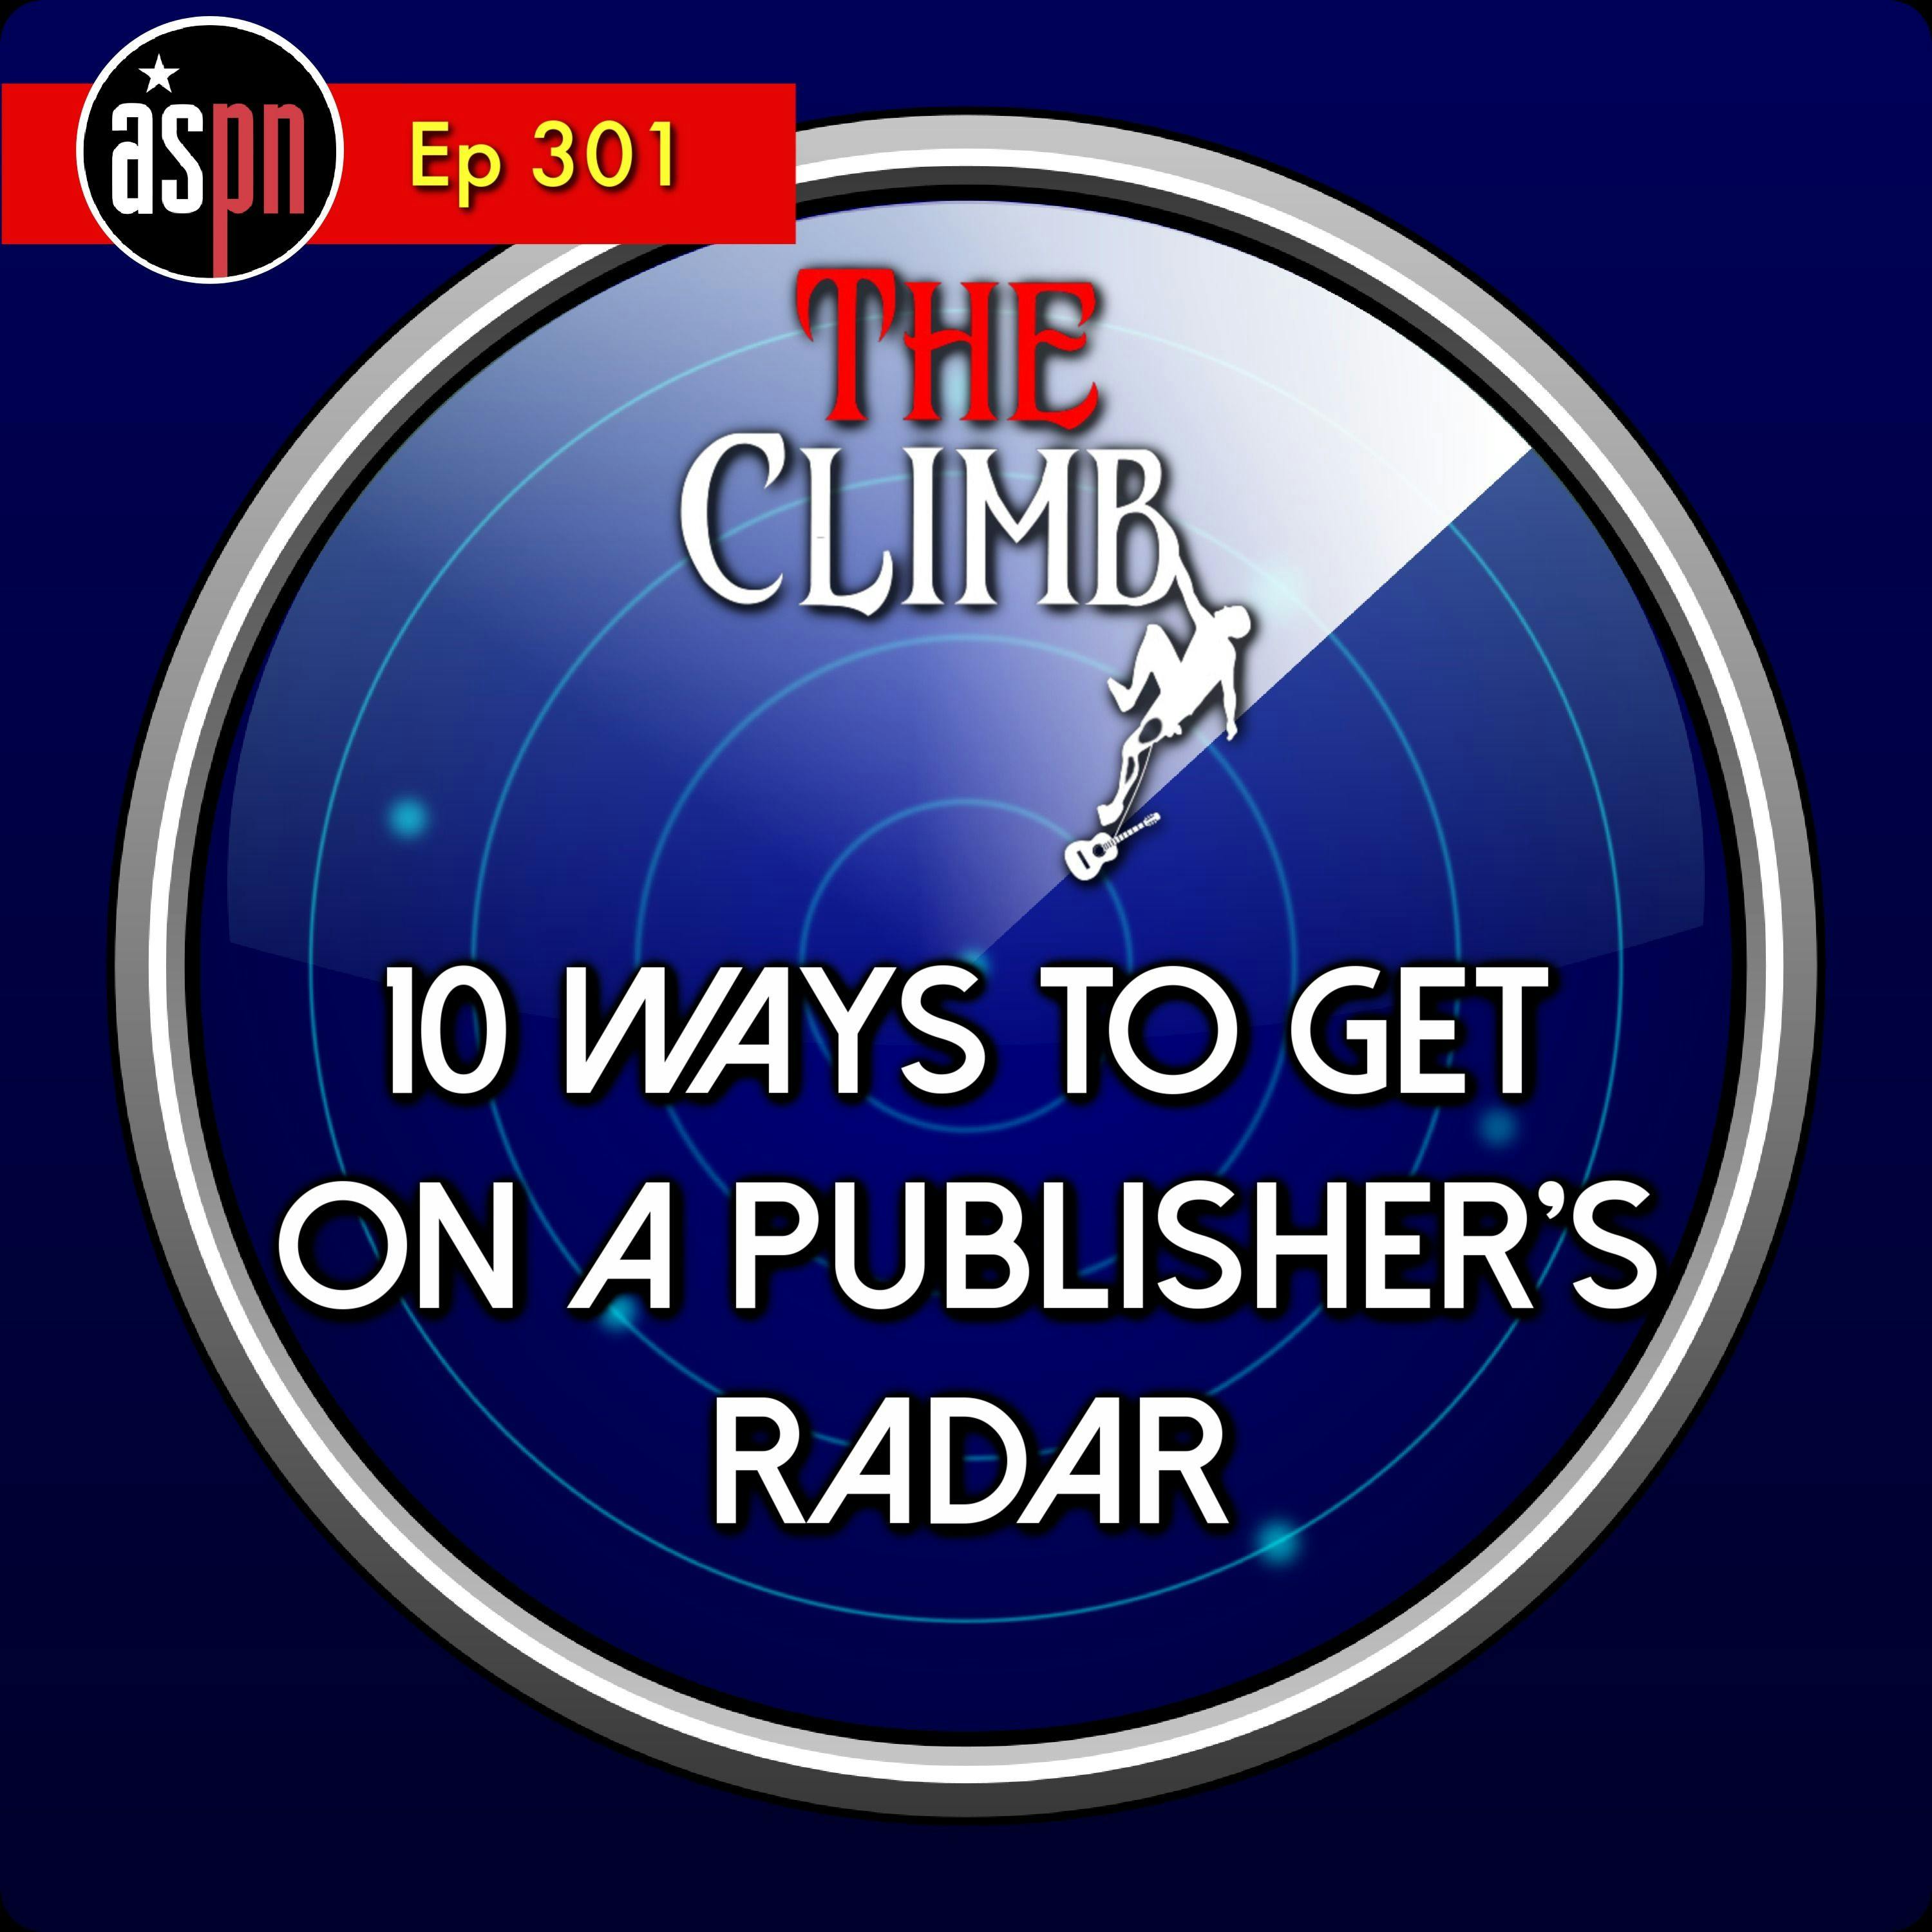 Ep 301: 10 Ways To Get On A Publisher's RADAR